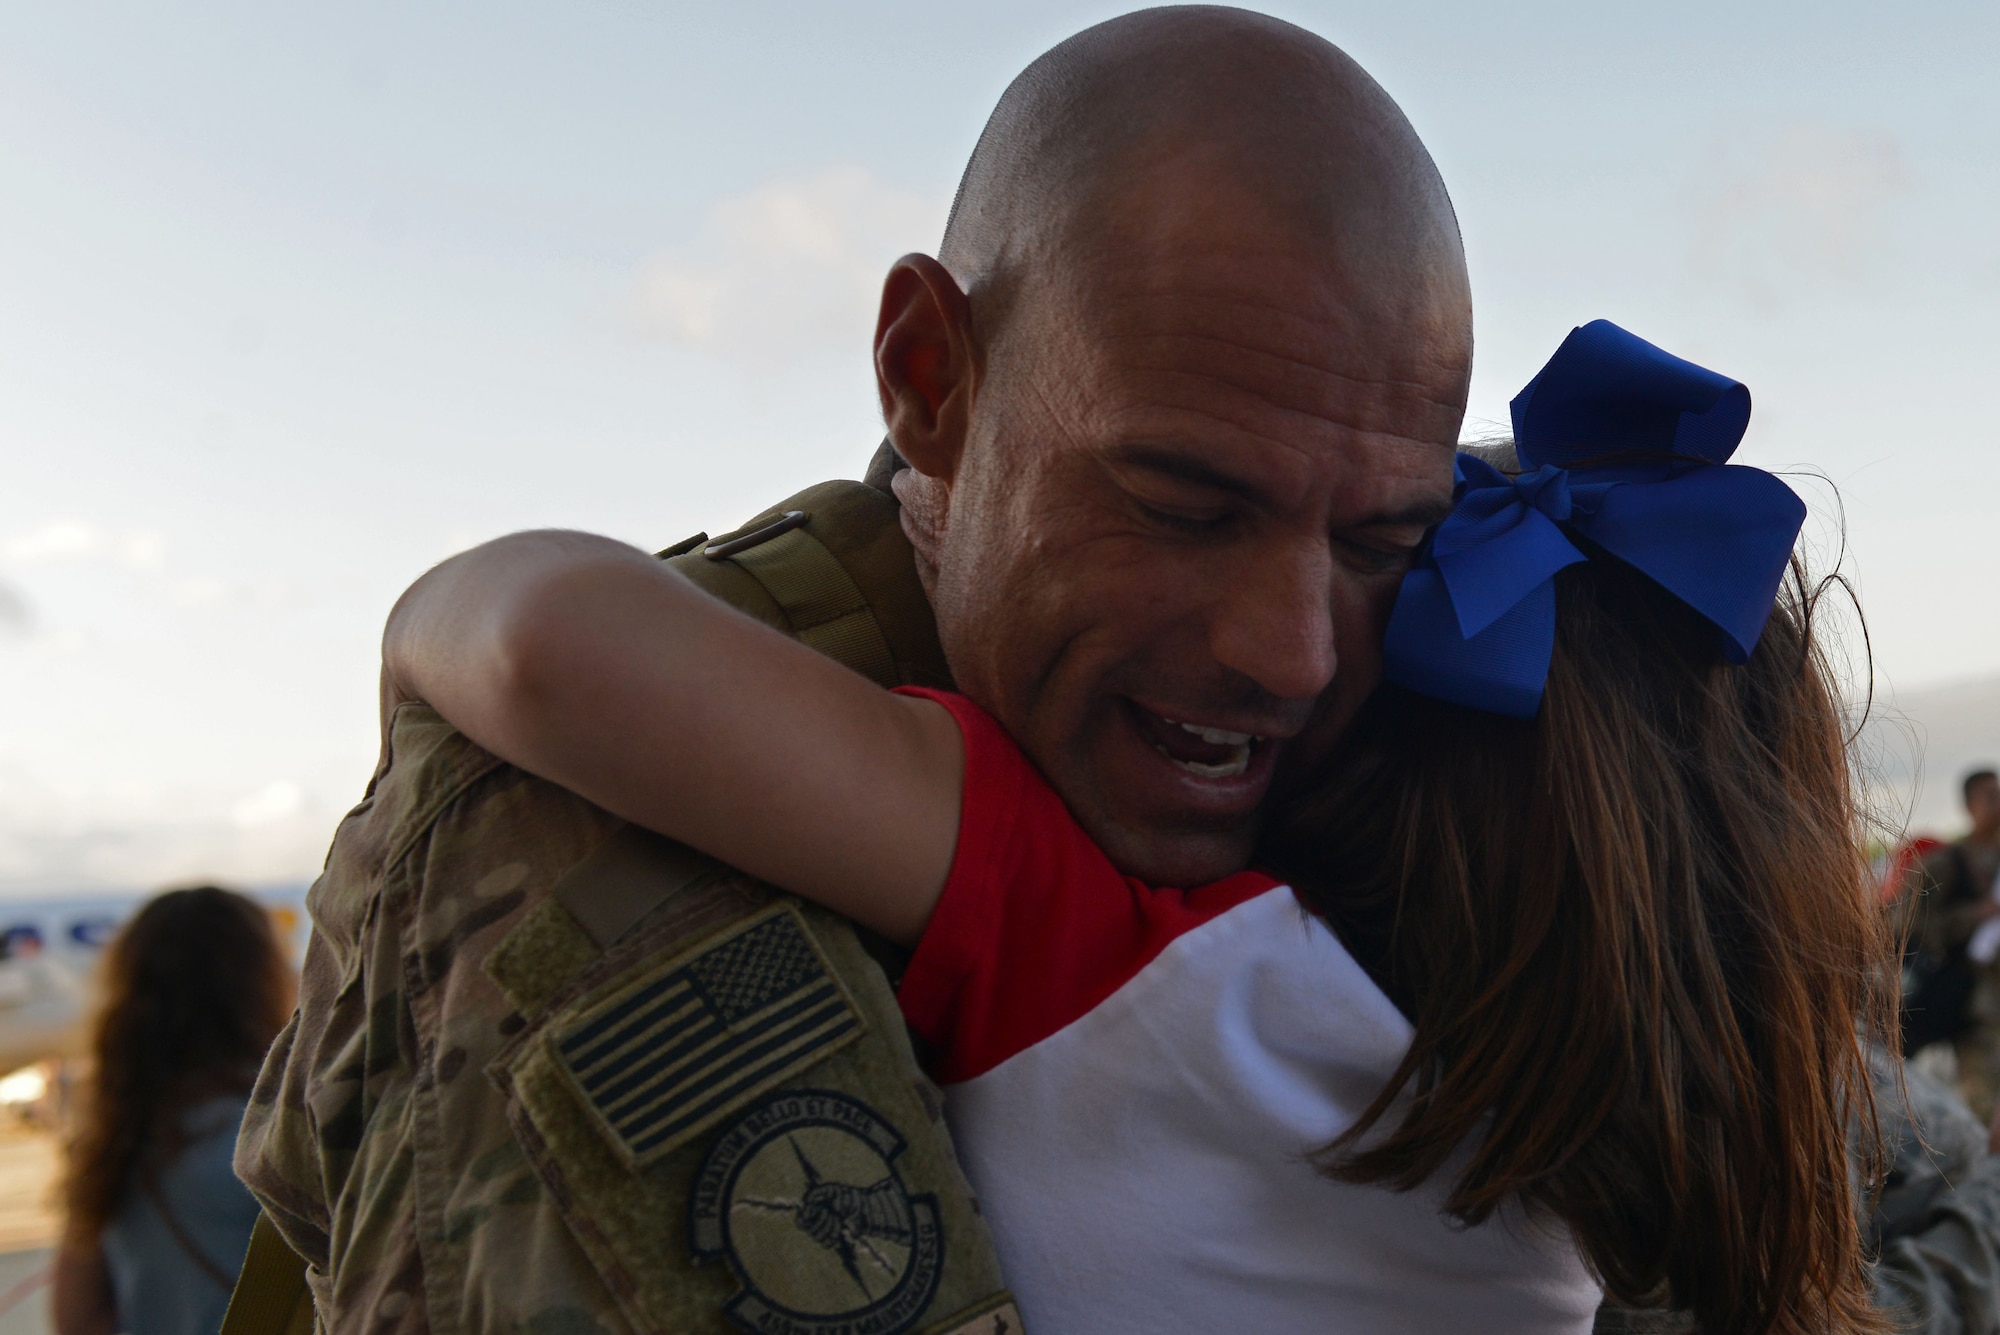 A U.S. Airman assigned to the 20th Fighter Wing hugs his child after returning to Shaw Air Force Base, S.C., May 5, 2017. Airmen returned after a six-month deployment to the United States Central Command area of responsibility. (U.S. Air Force photo by Airman 1st Class Destinee Sweeney)